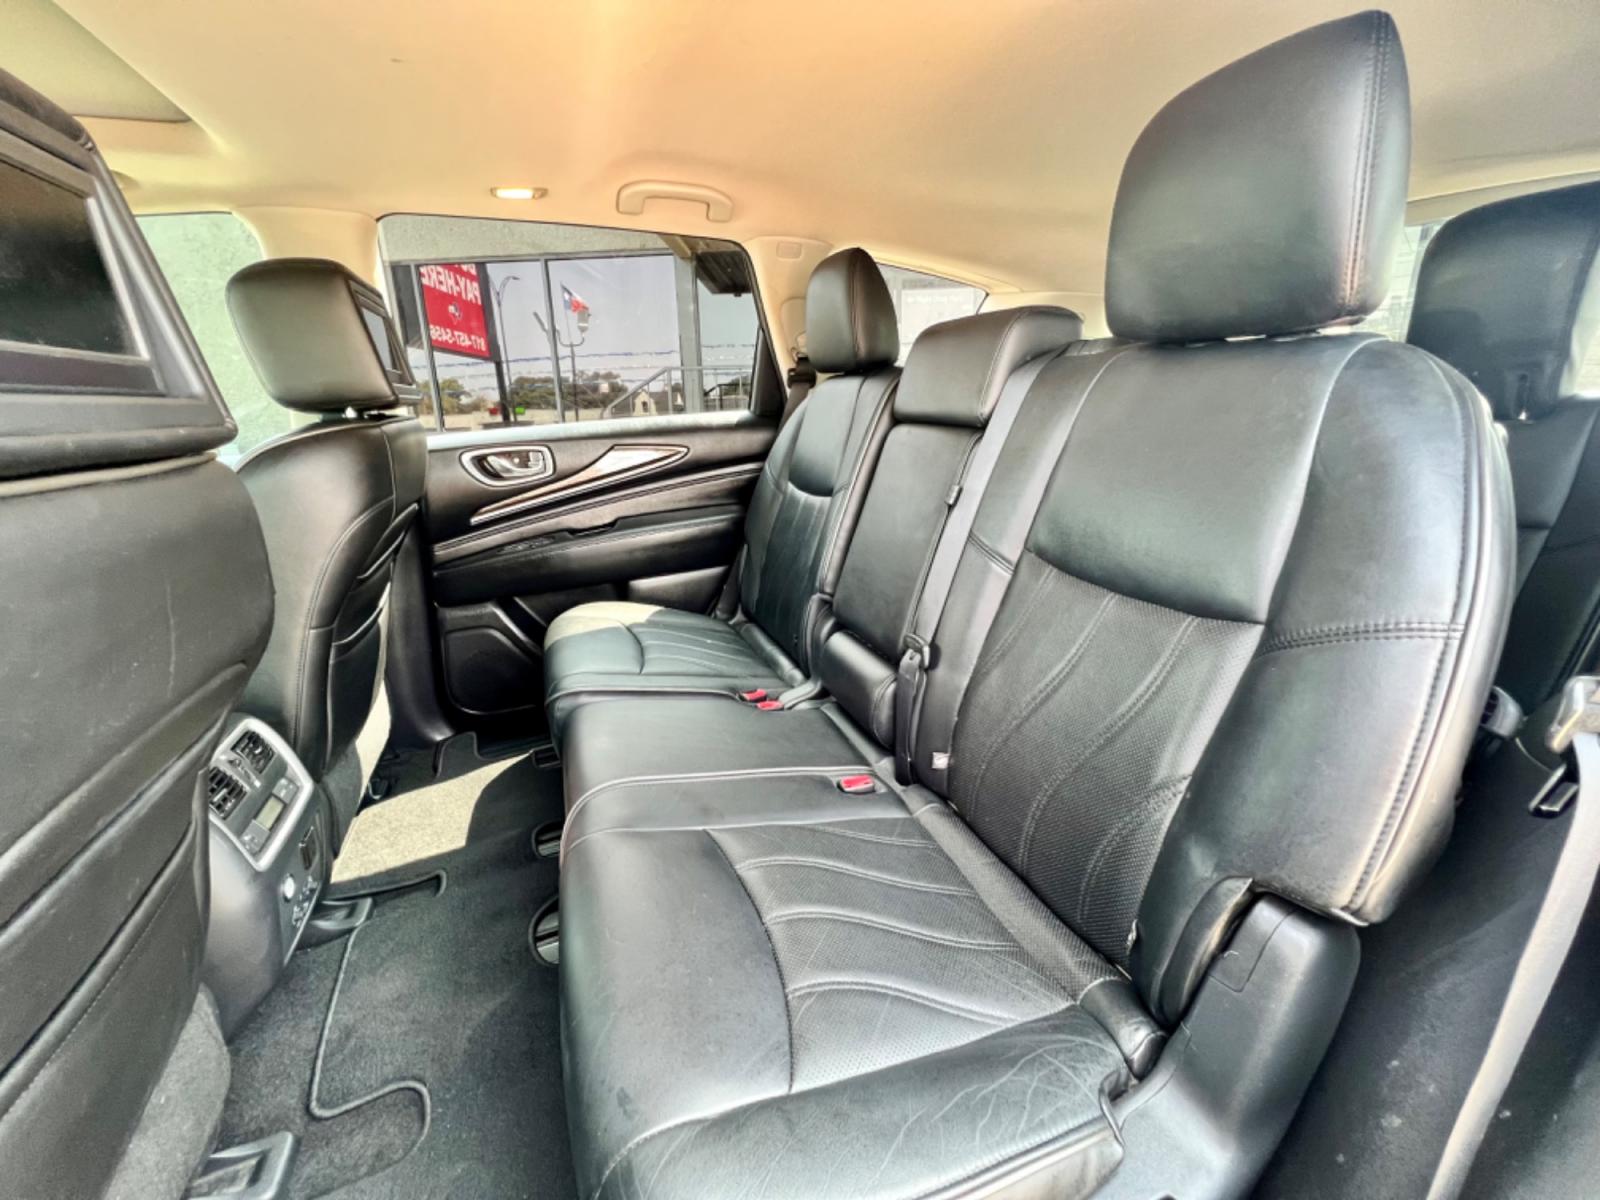 2014 GRAY INFINITI QX60 (5N1AL0MN1EC) , located at 5900 E. Lancaster Ave., Fort Worth, TX, 76112, (817) 457-5456, 0.000000, 0.000000 - This is a 2014 INFINITI QX60 4 DOOR SUV that is in excellent condition. There are no dents or scratches. The interior is clean with no rips or tears or stains. All power windows, door locks and seats. Ice cold AC for those hot Texas summer days. It is equipped with a CD player, AM/FM radio, AUX port - Photo #12